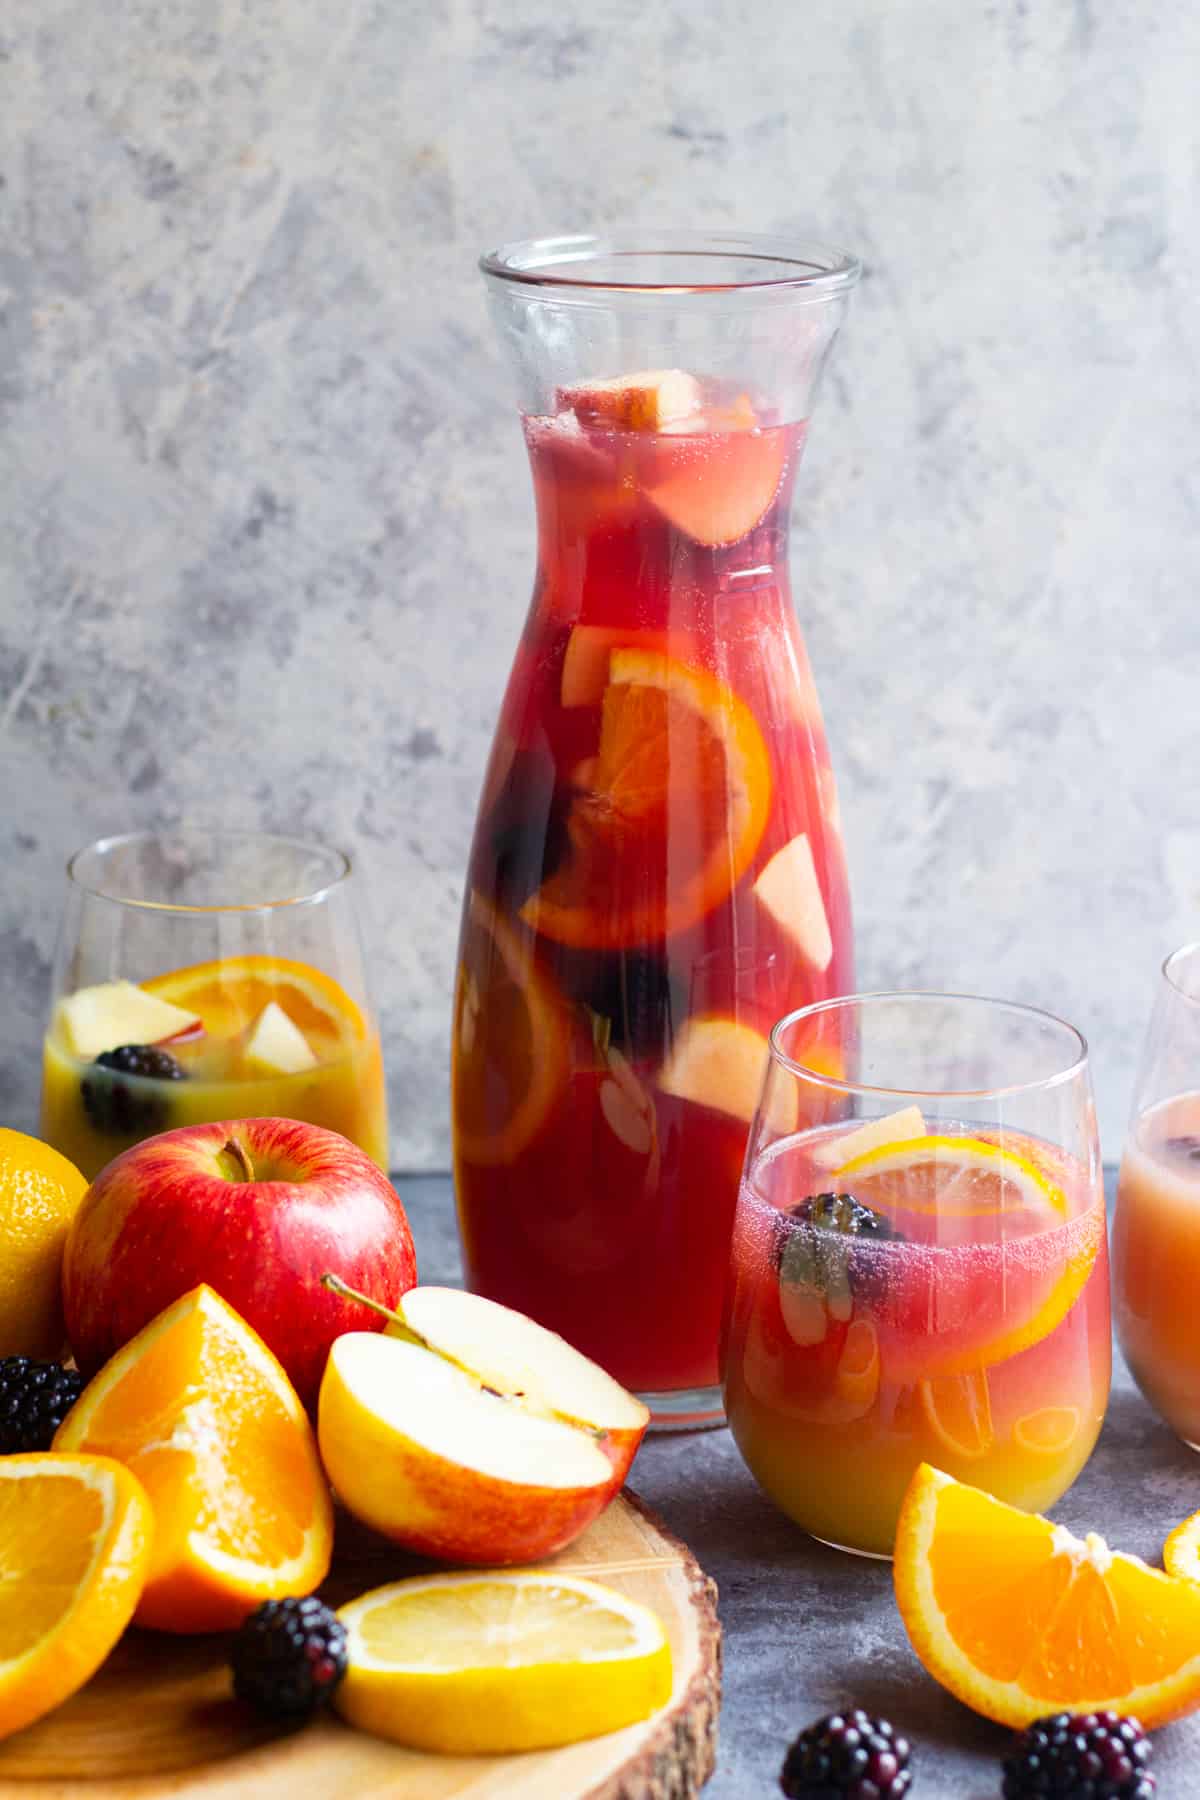 Here is a delightful non-alcoholic sangria recipe that is a great pairing around holiday festivities and dinner. This virgin sangria recipe is beautiful and easy to make.